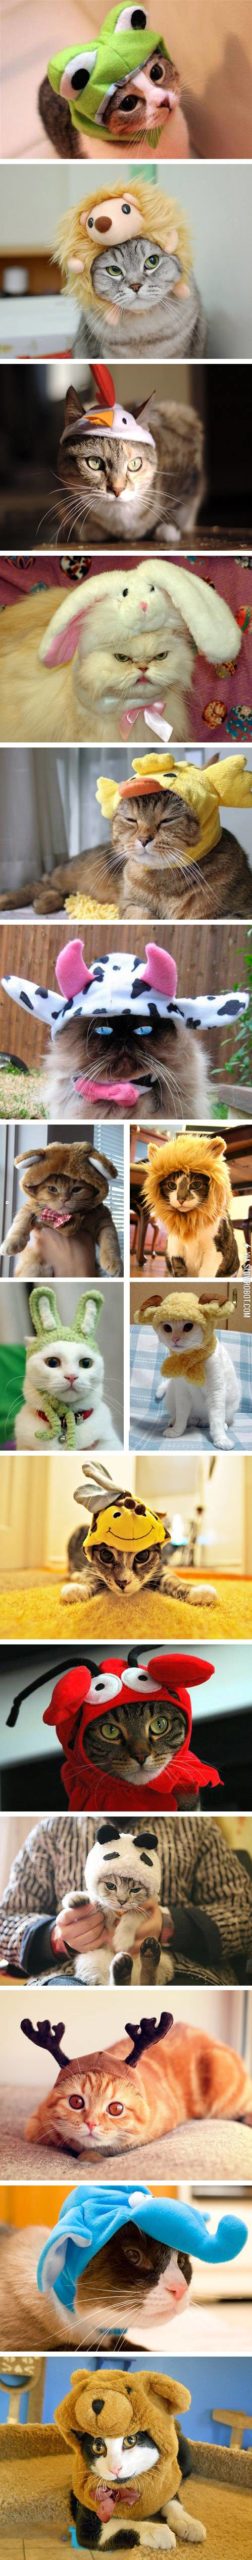 Cats+in+hats.